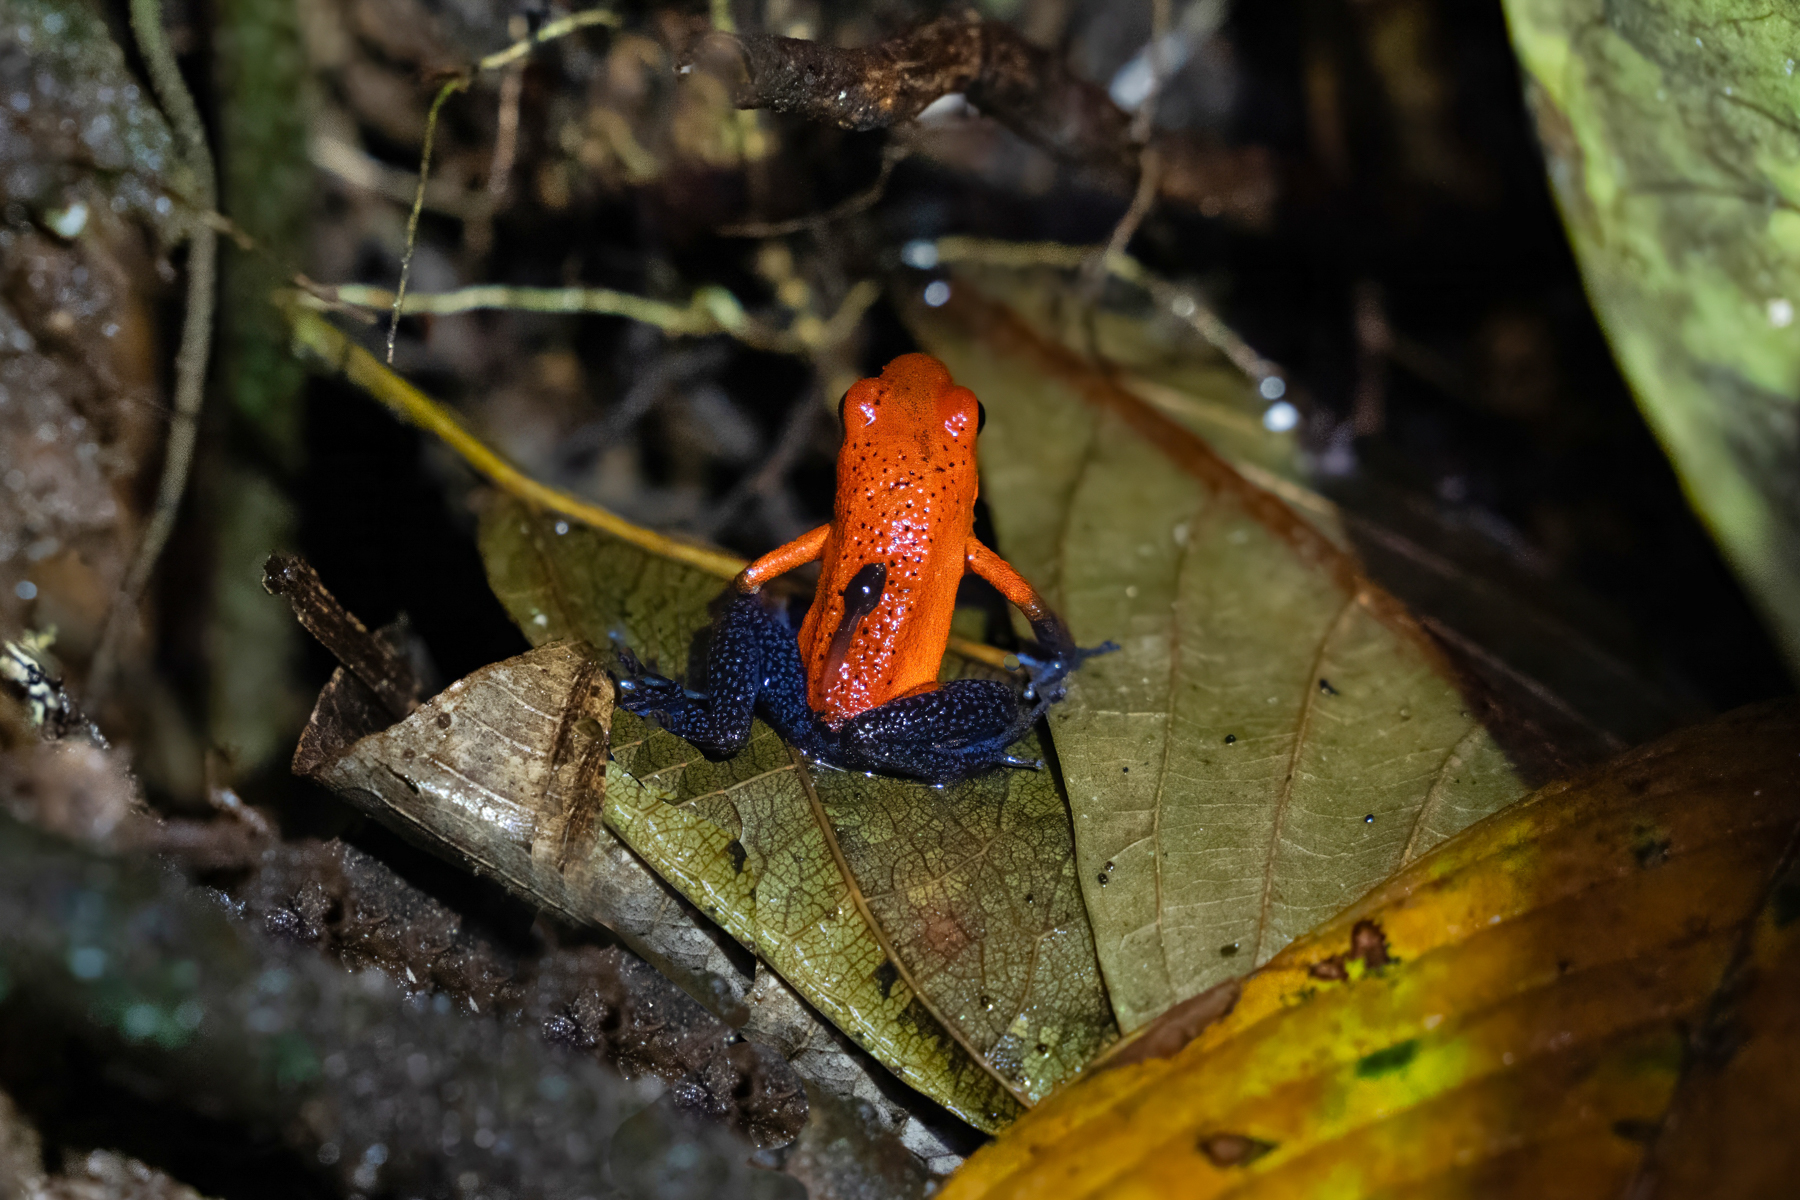 Strawberry Poison Frog carrying its precious tadpole around on its back (image by Inger Vandyke)